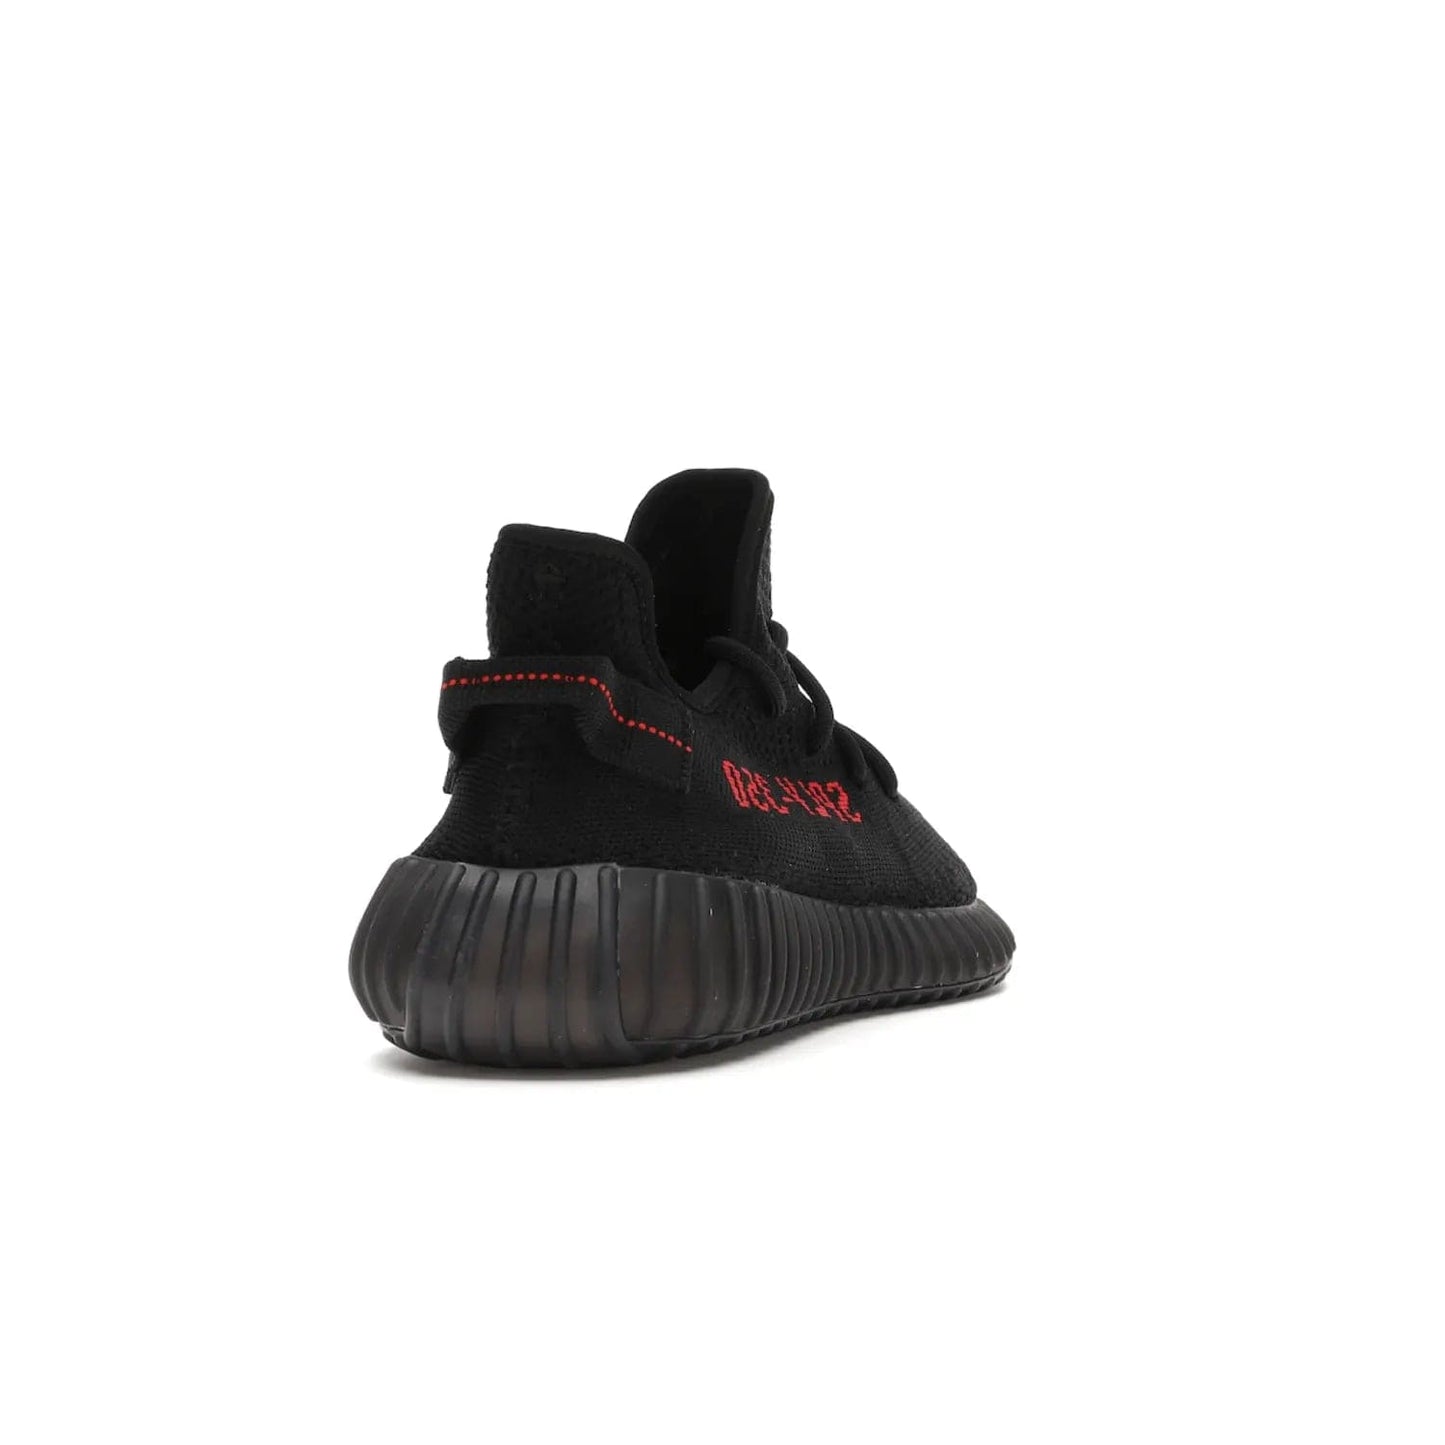 adidas Yeezy Boost 350 V2 Black Red (2017/2020) - Image 30 - Only at www.BallersClubKickz.com - Adidas Yeezy Boost 350 V2 Black Red: a classic colorway featuring black Primeknit upper, BOOST cushioning system, and iconic "SPLY-350" text. Released in 2017 for a retail price of $220.